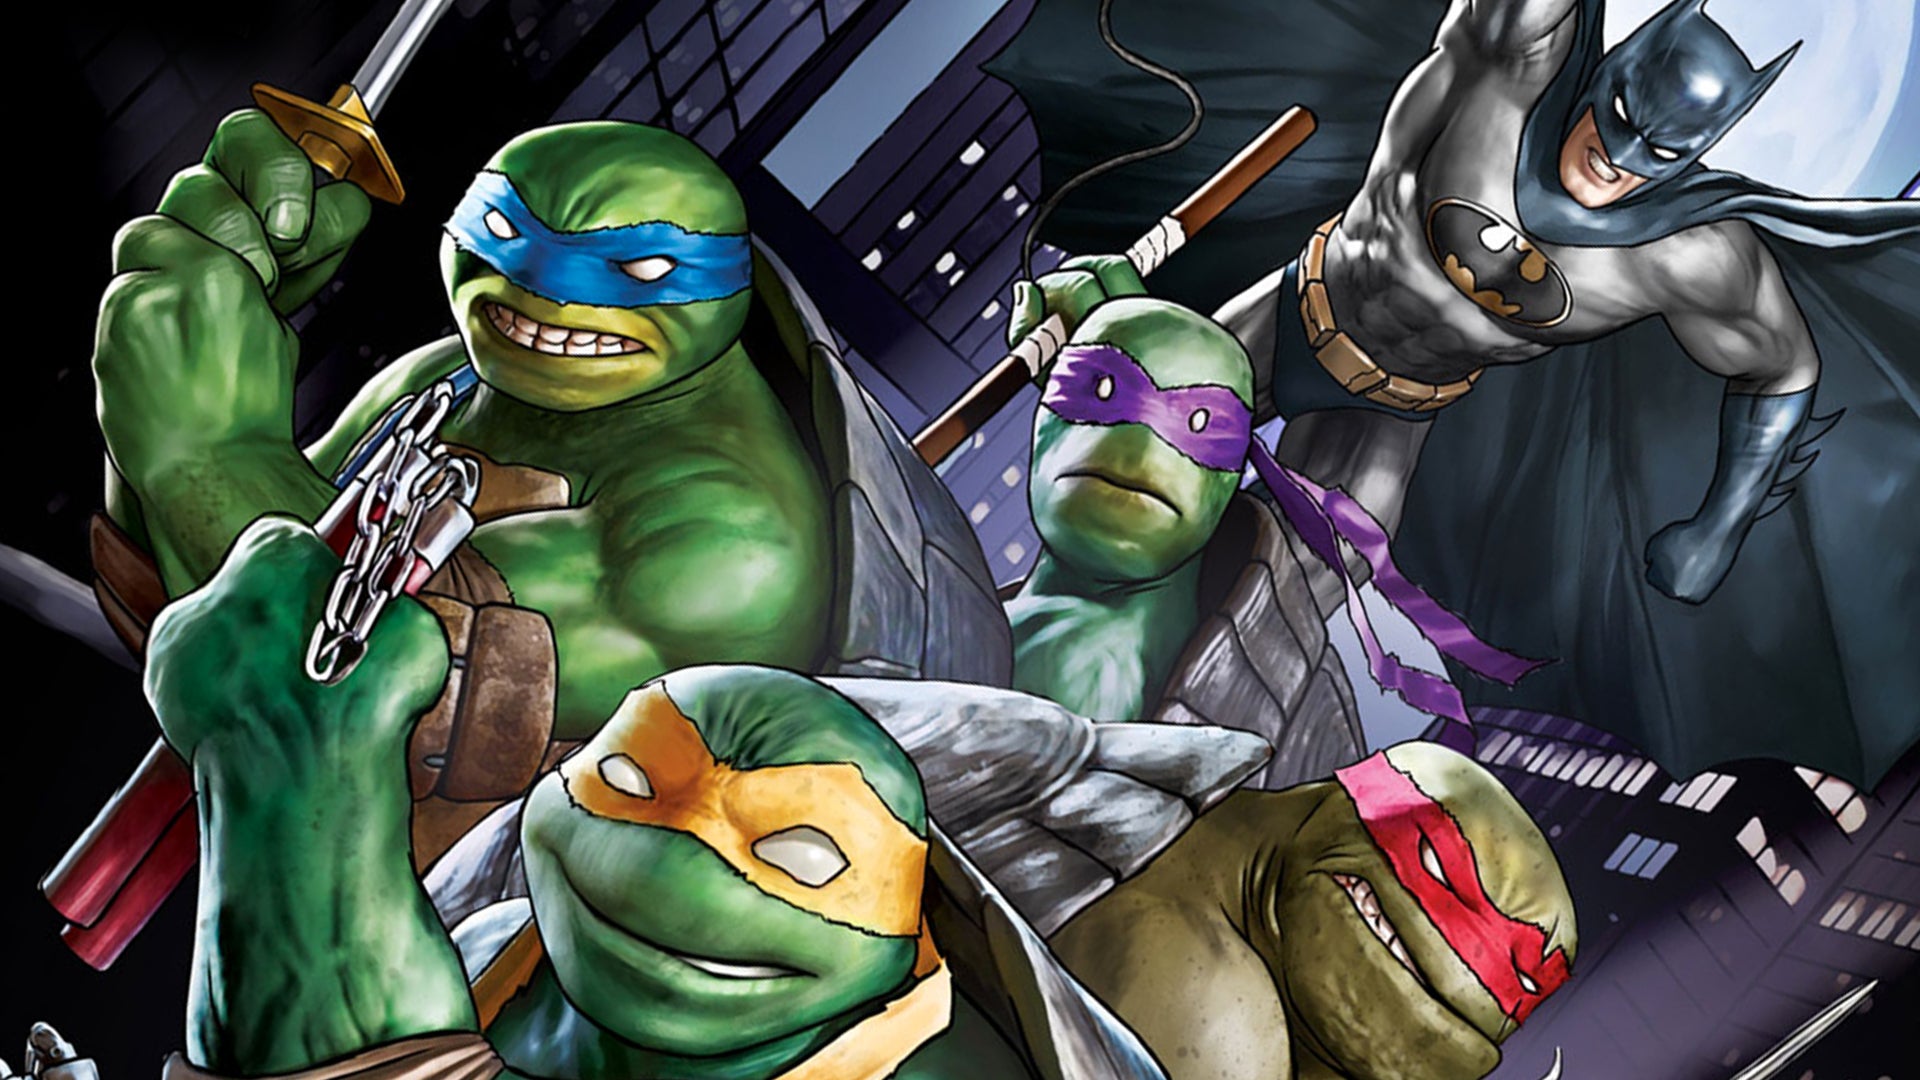 https://www.theperiodictableofawesome.com/wp-content/uploads/2019/06/batmantmnt-cover.jpg